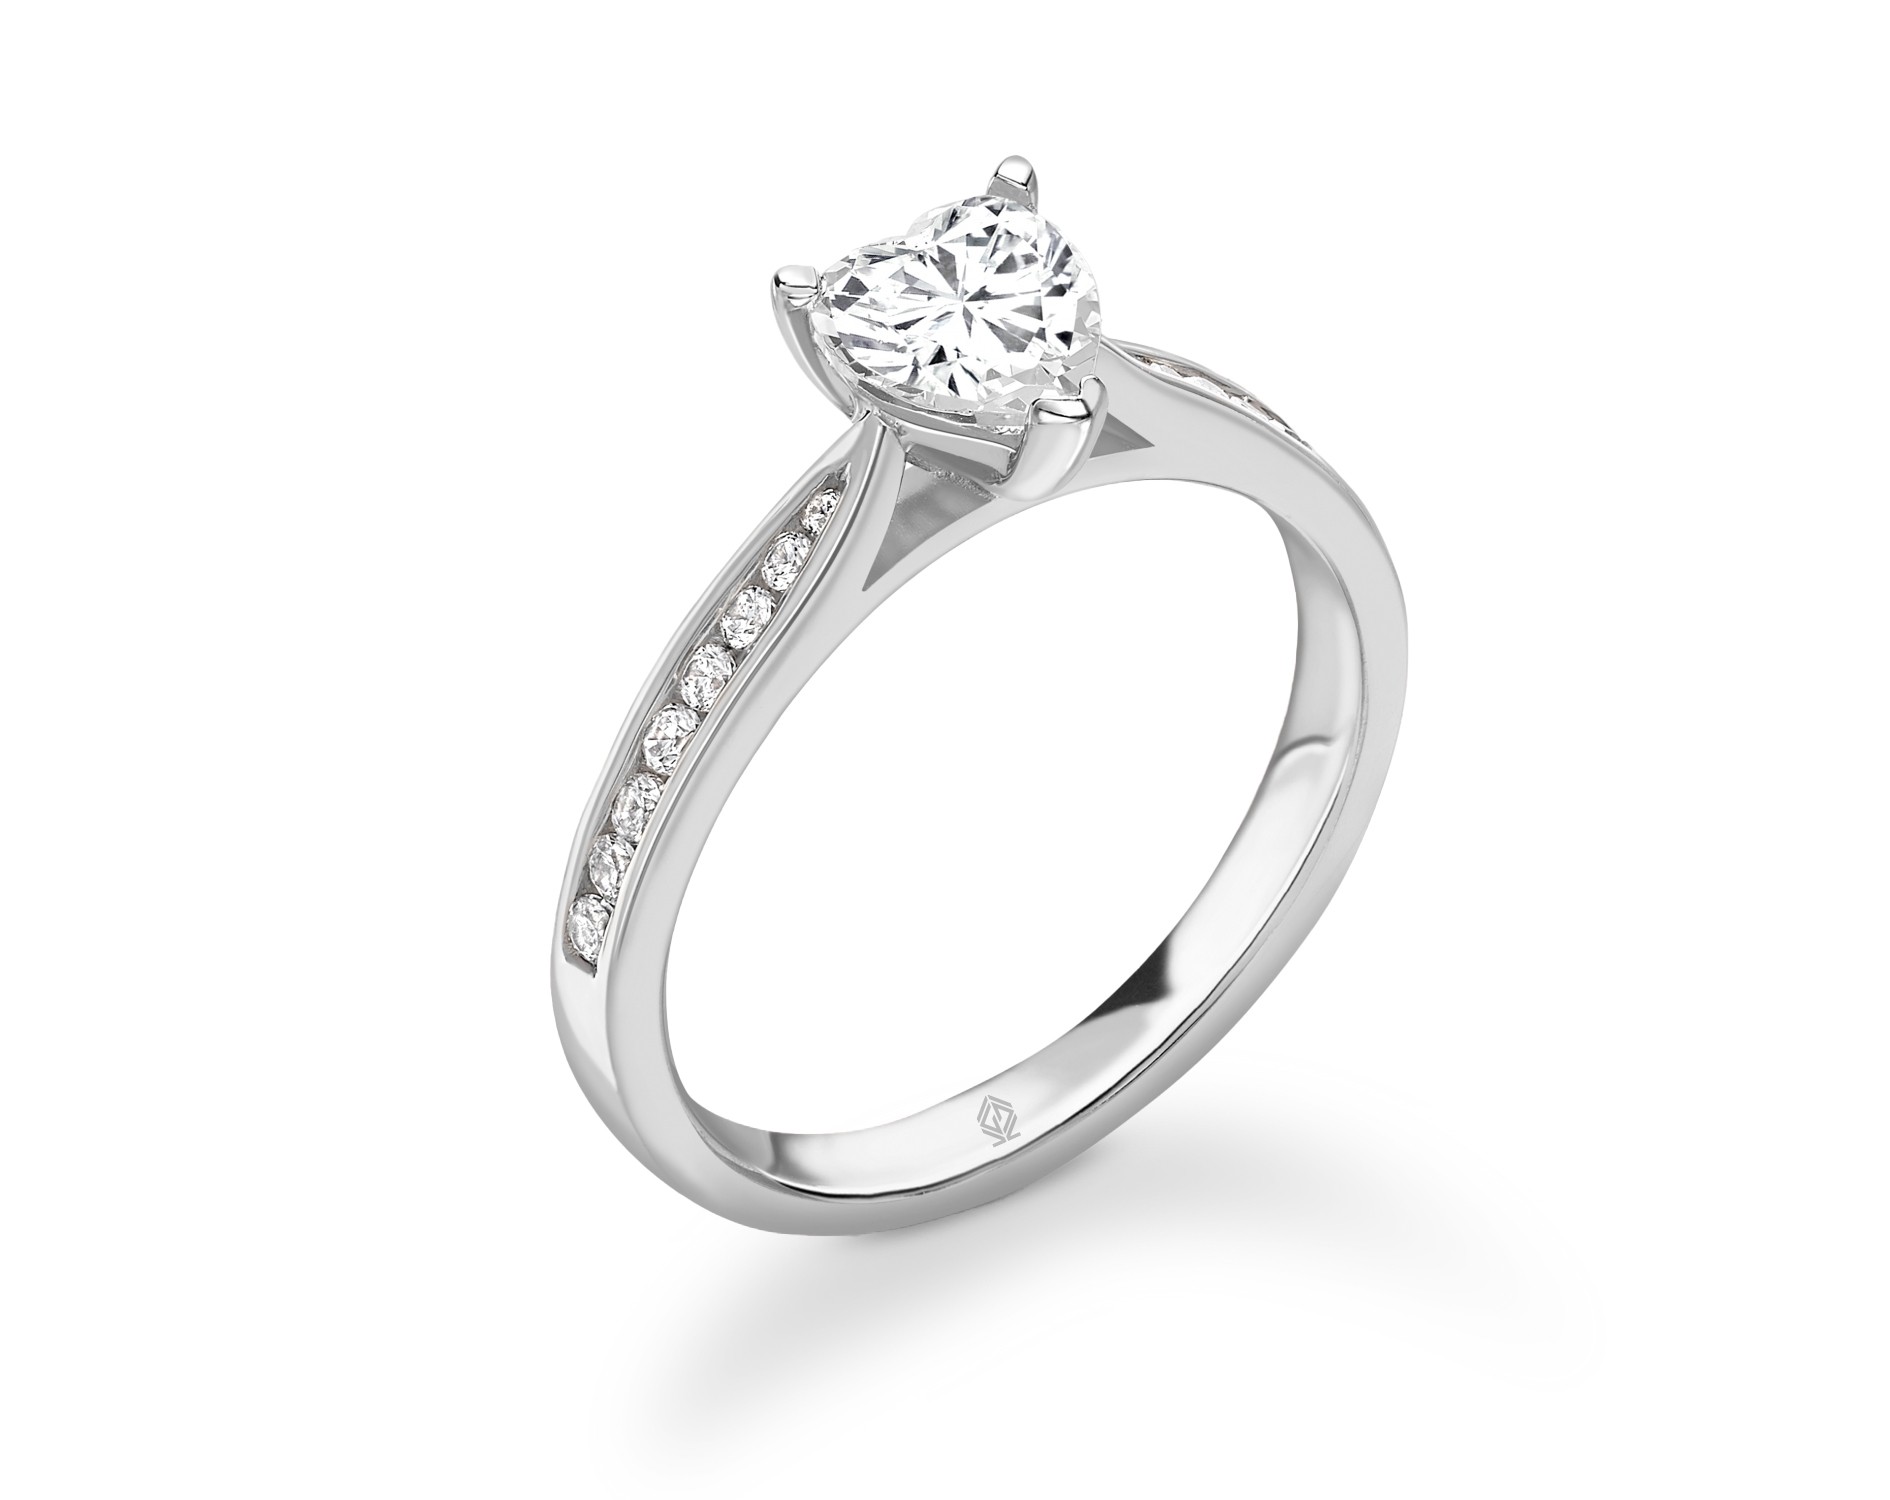 18K WHITE GOLD HEART CUT DIAMOND ENGAGEMENT RING WITH SIDE STONES CHANNEL SET